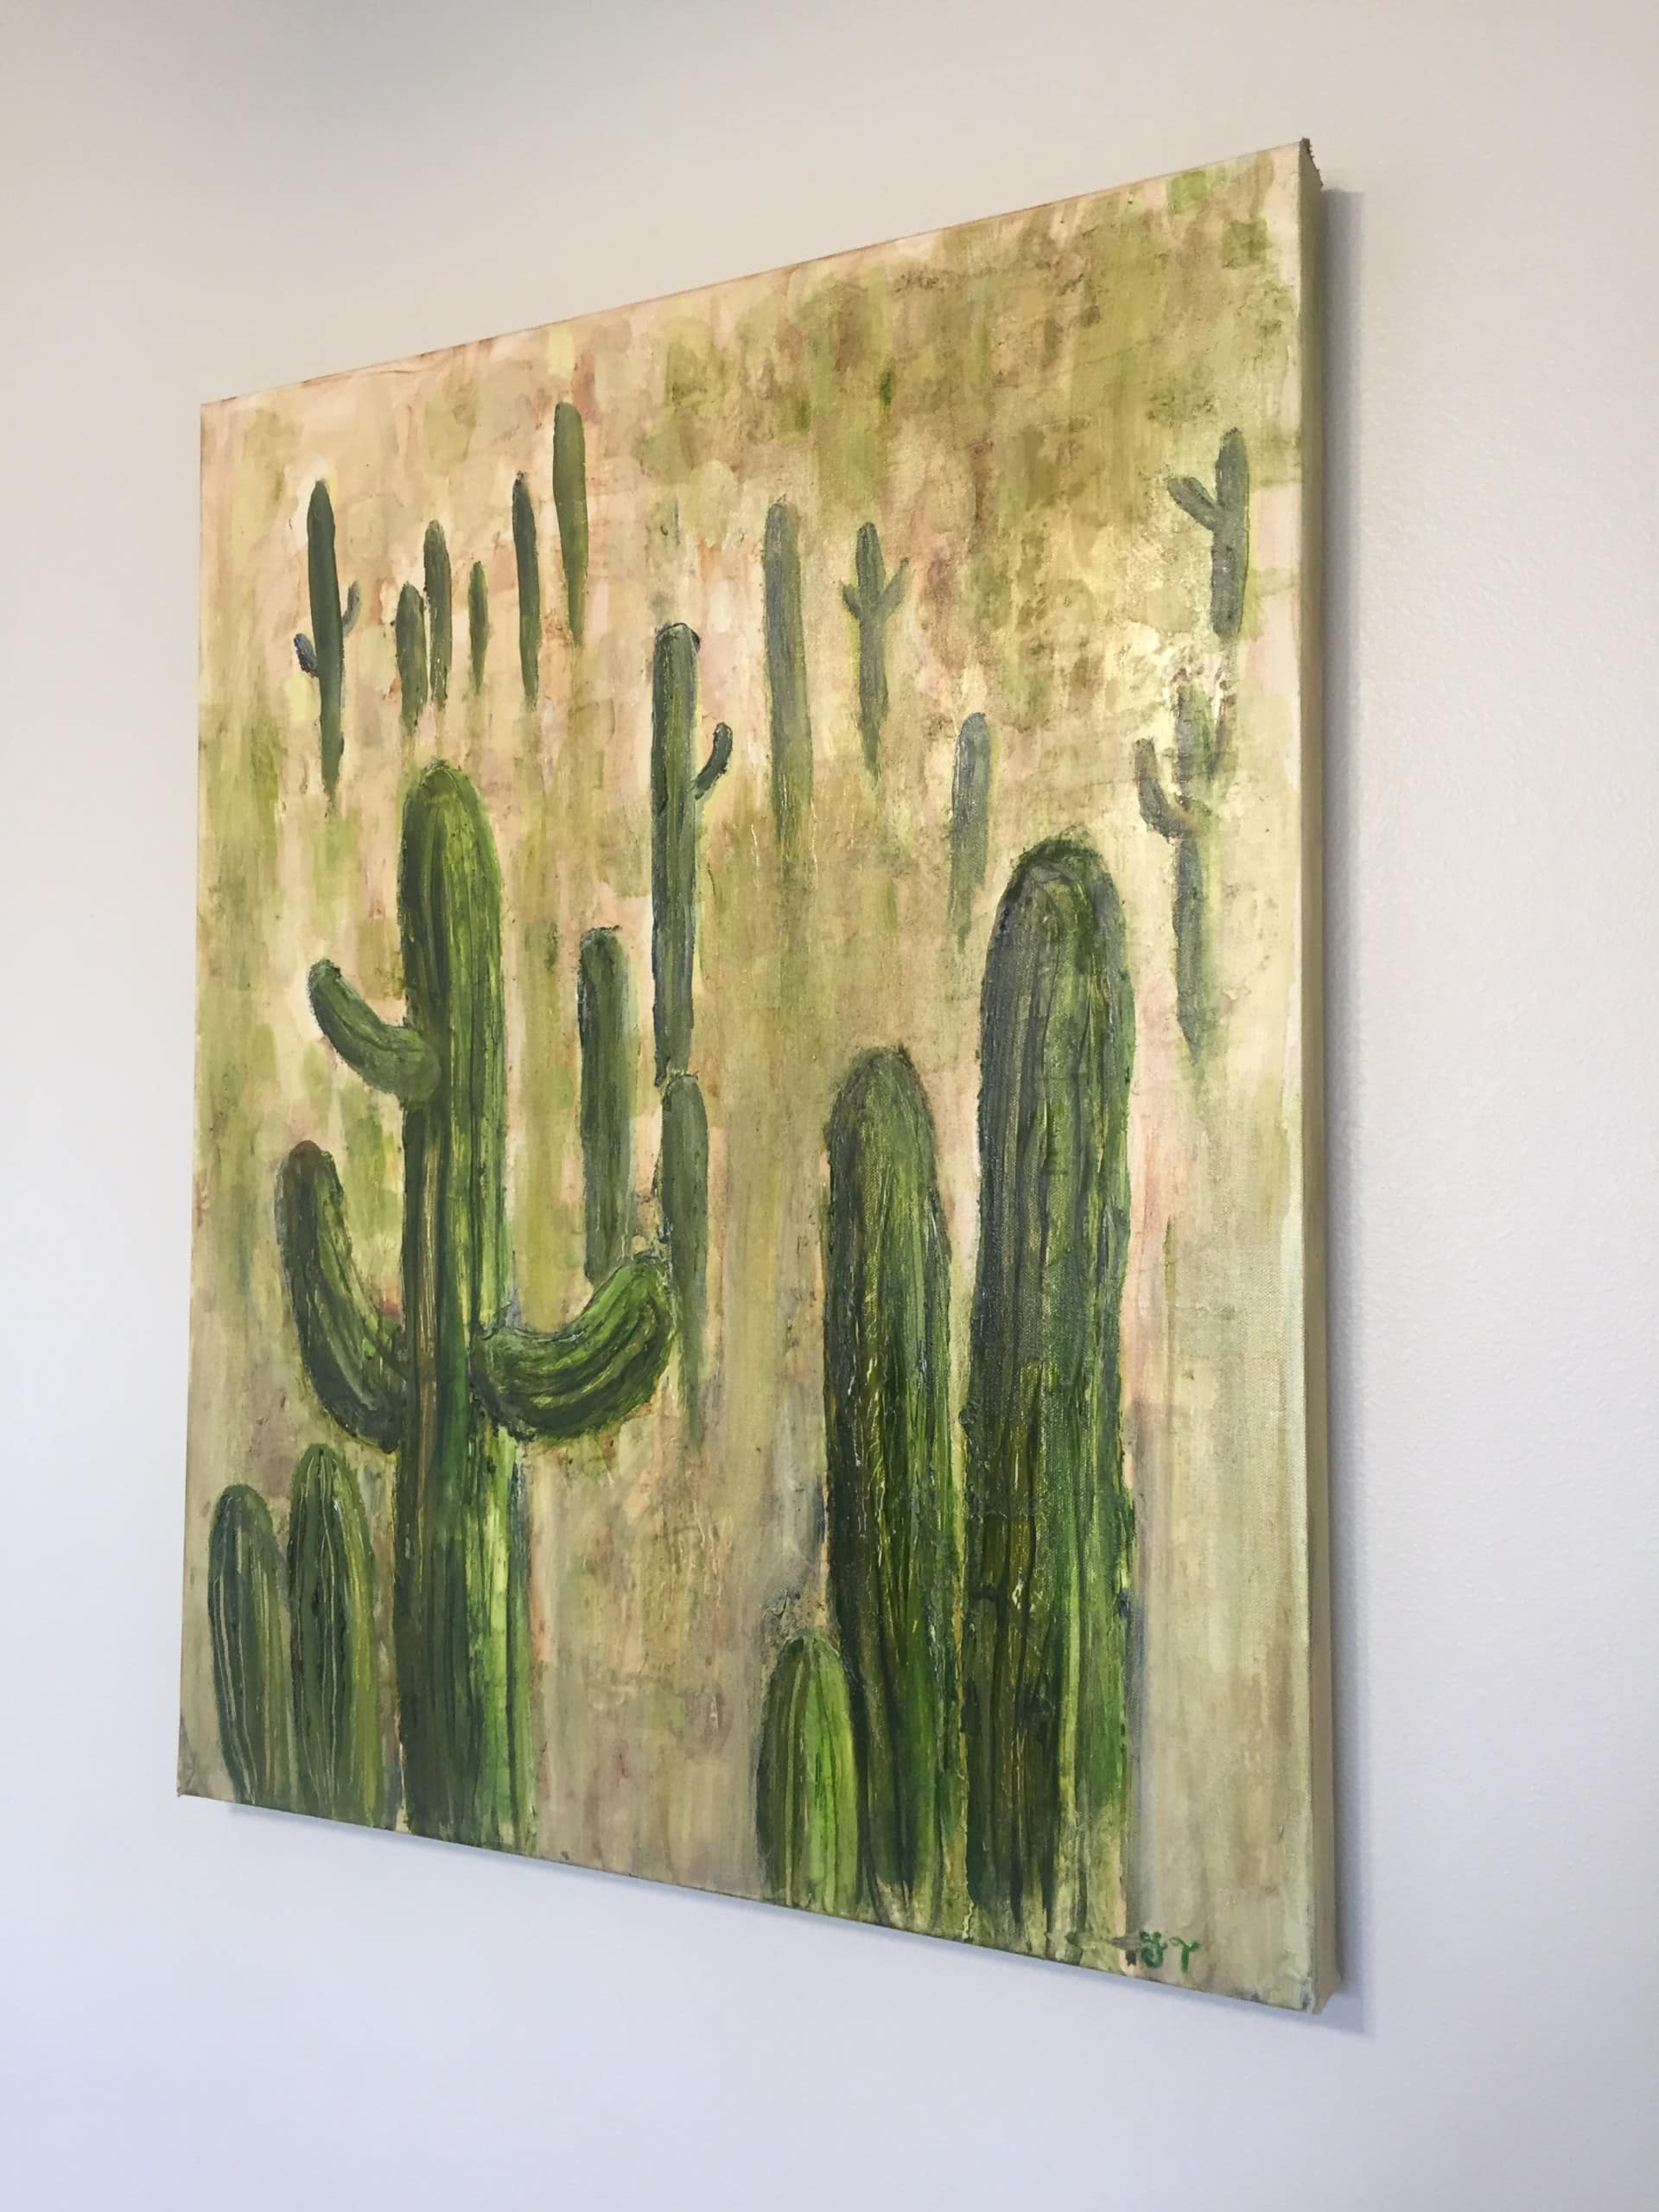 A finished painting of saguaro cactuses. 